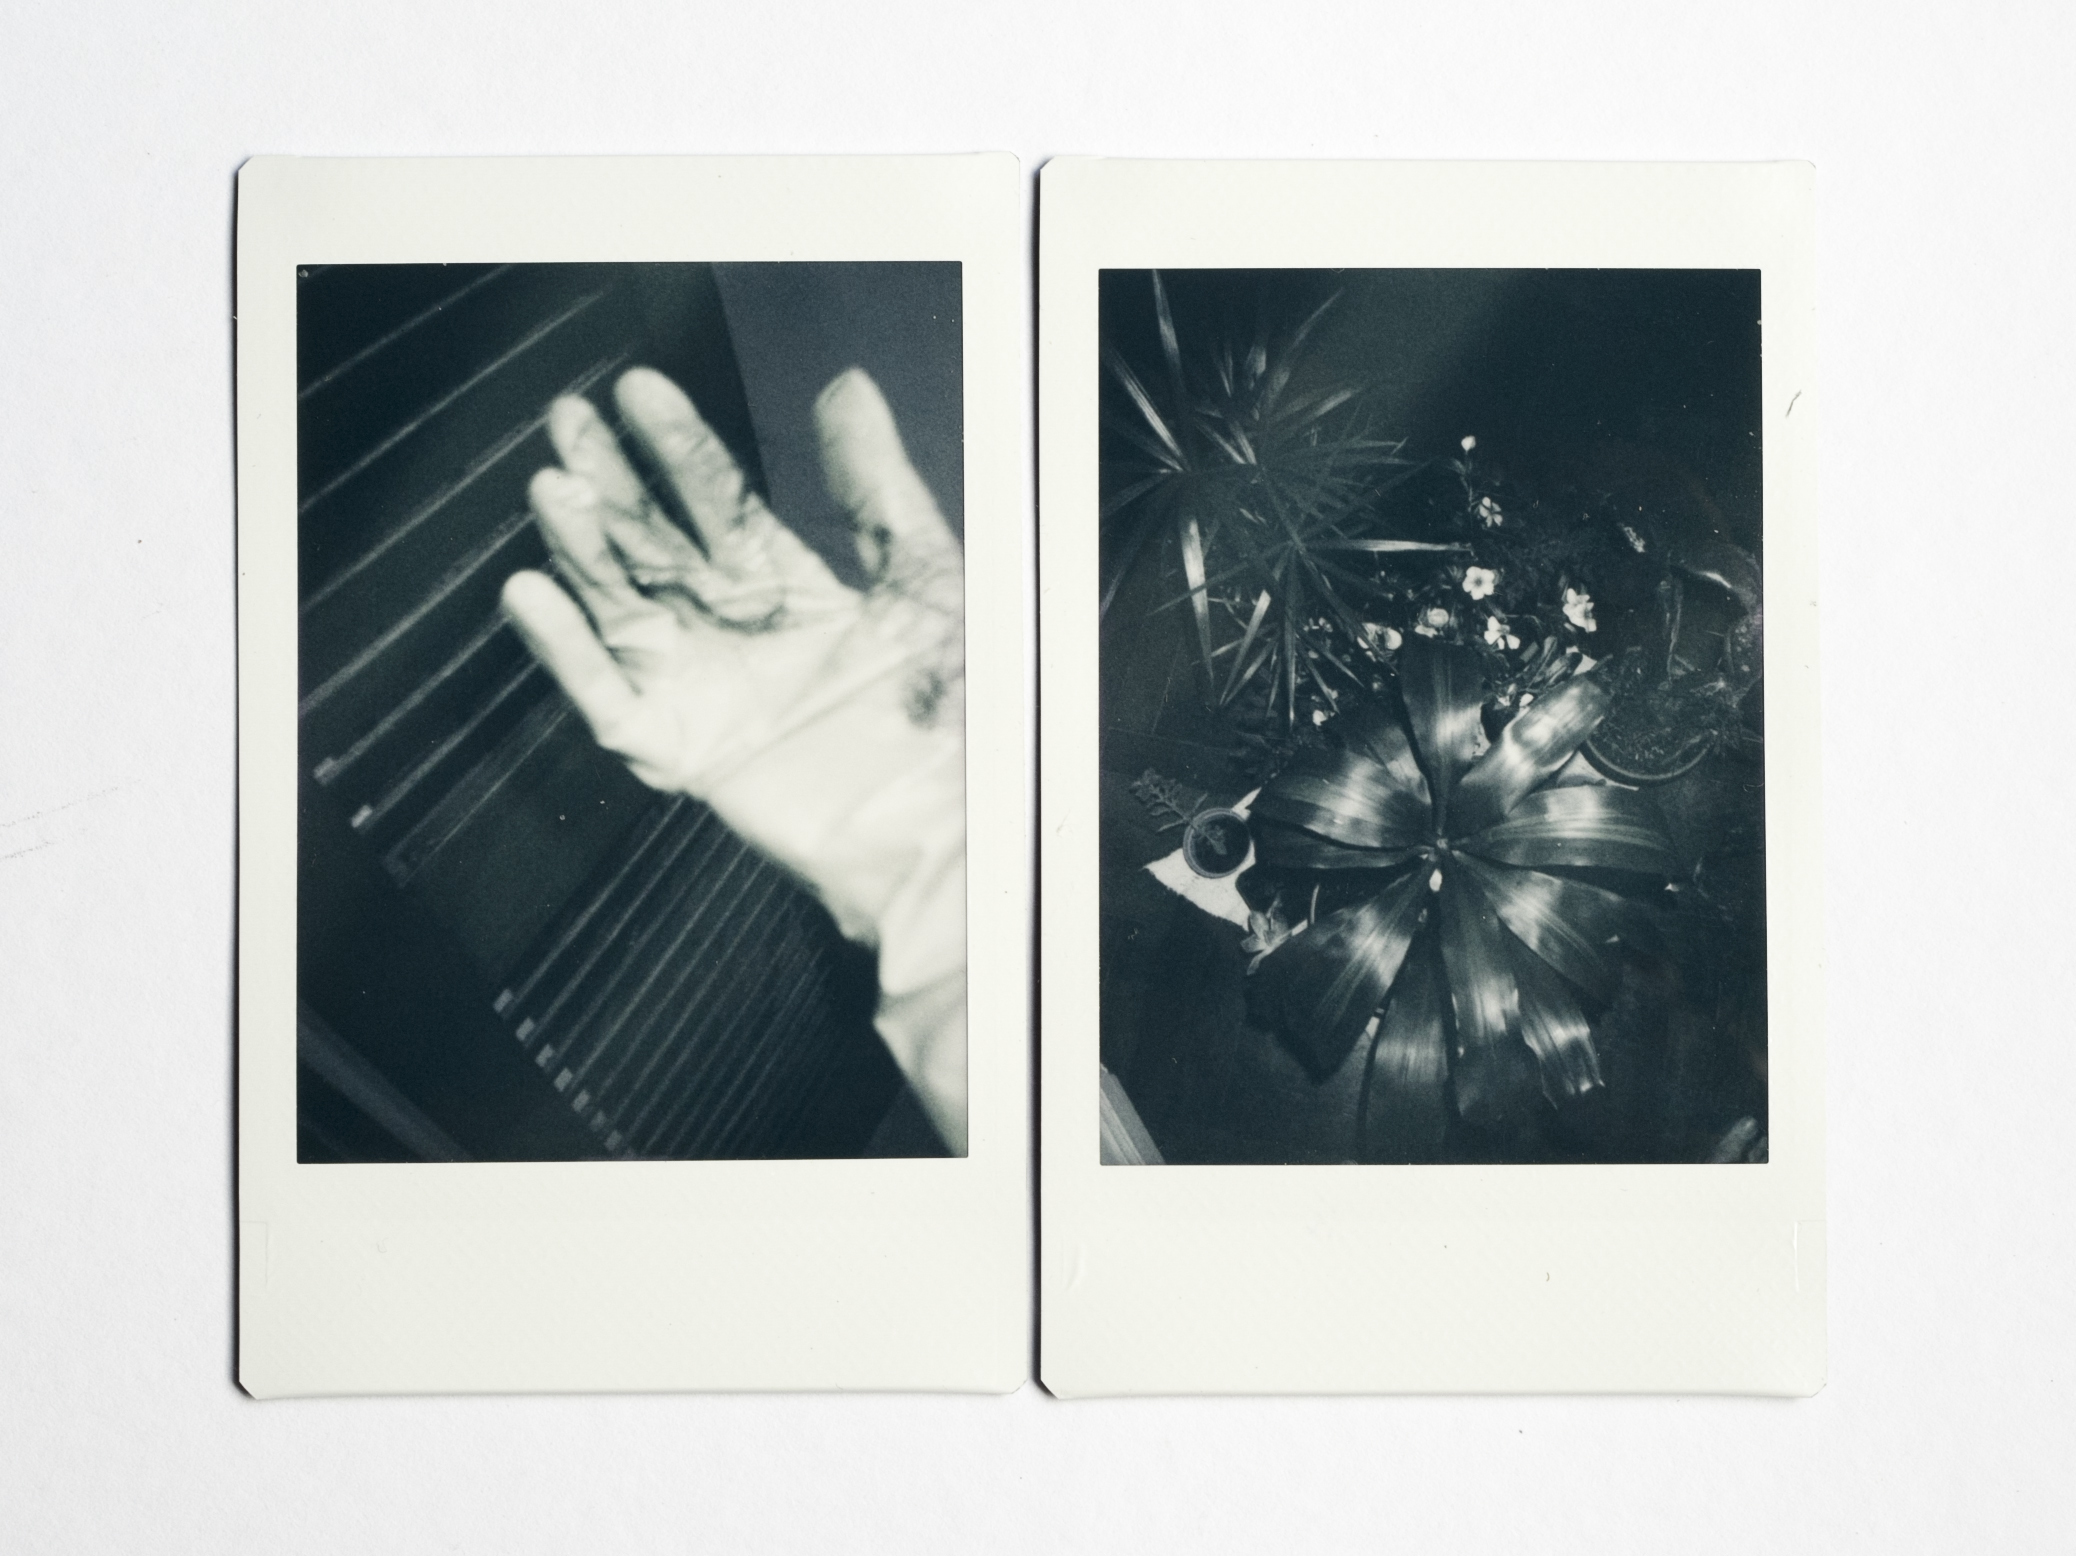 Photographer Uses Instant Images To Make Sense Of Life In Isolation